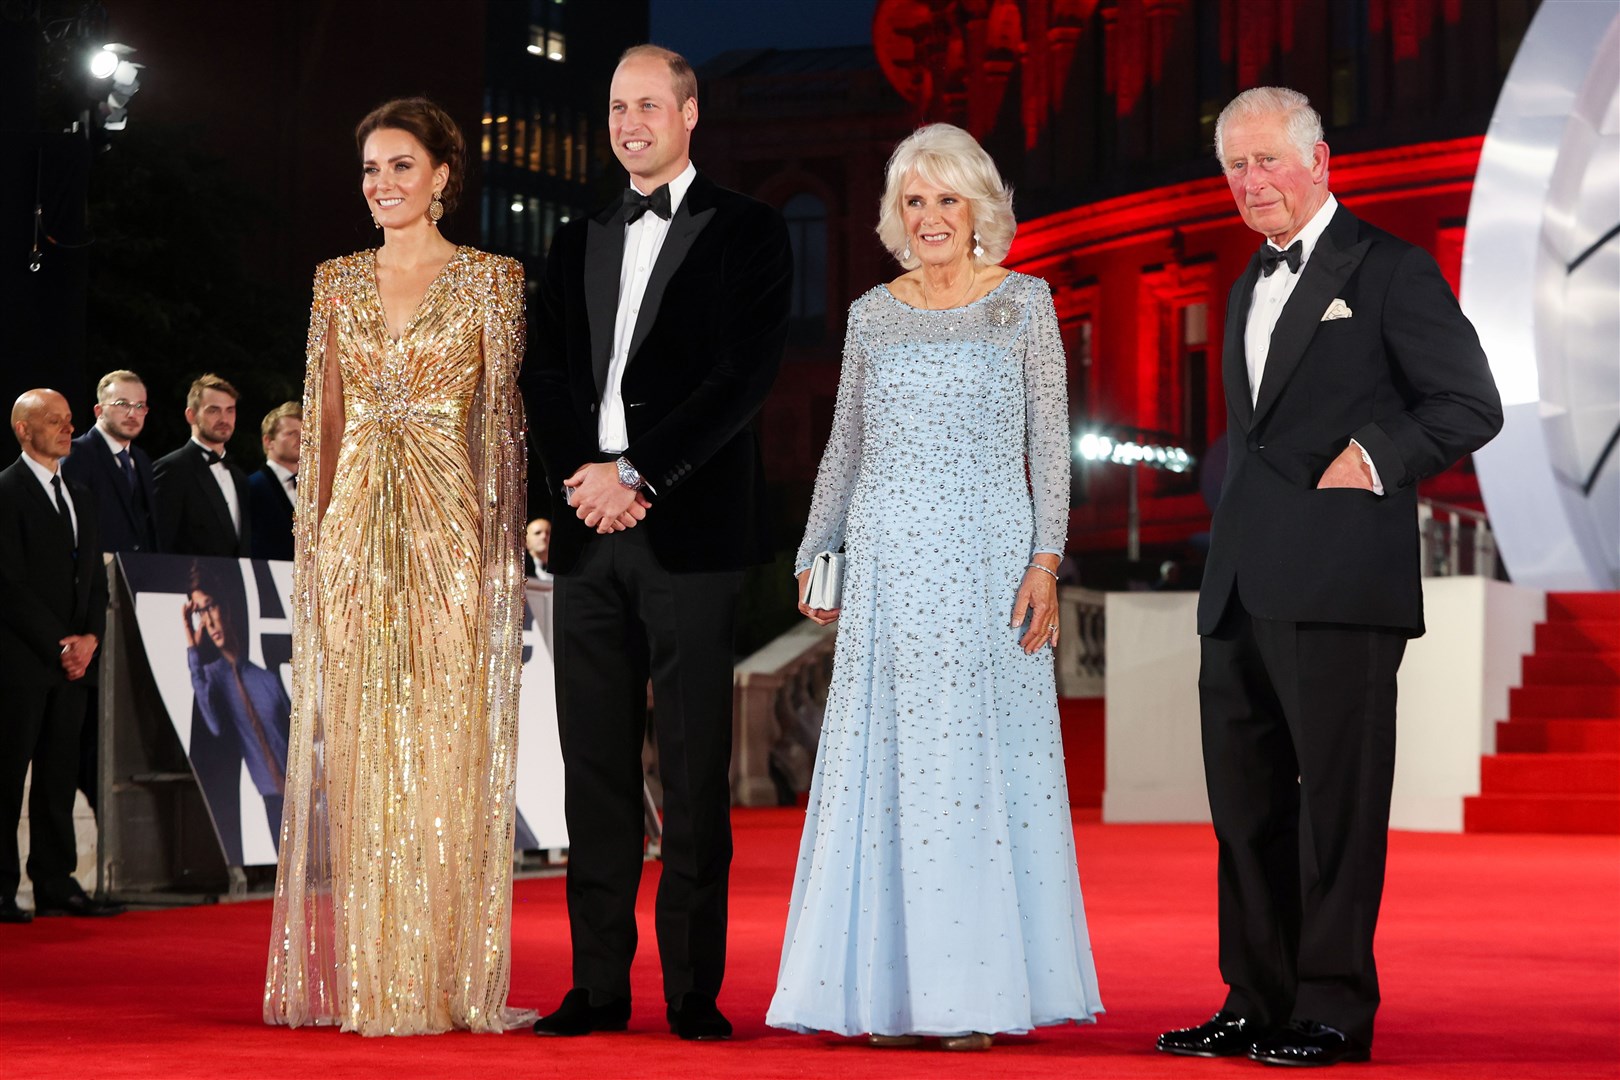 Members of the royal family often attend the premieres of James Bond films (Chris Jackson/PA)